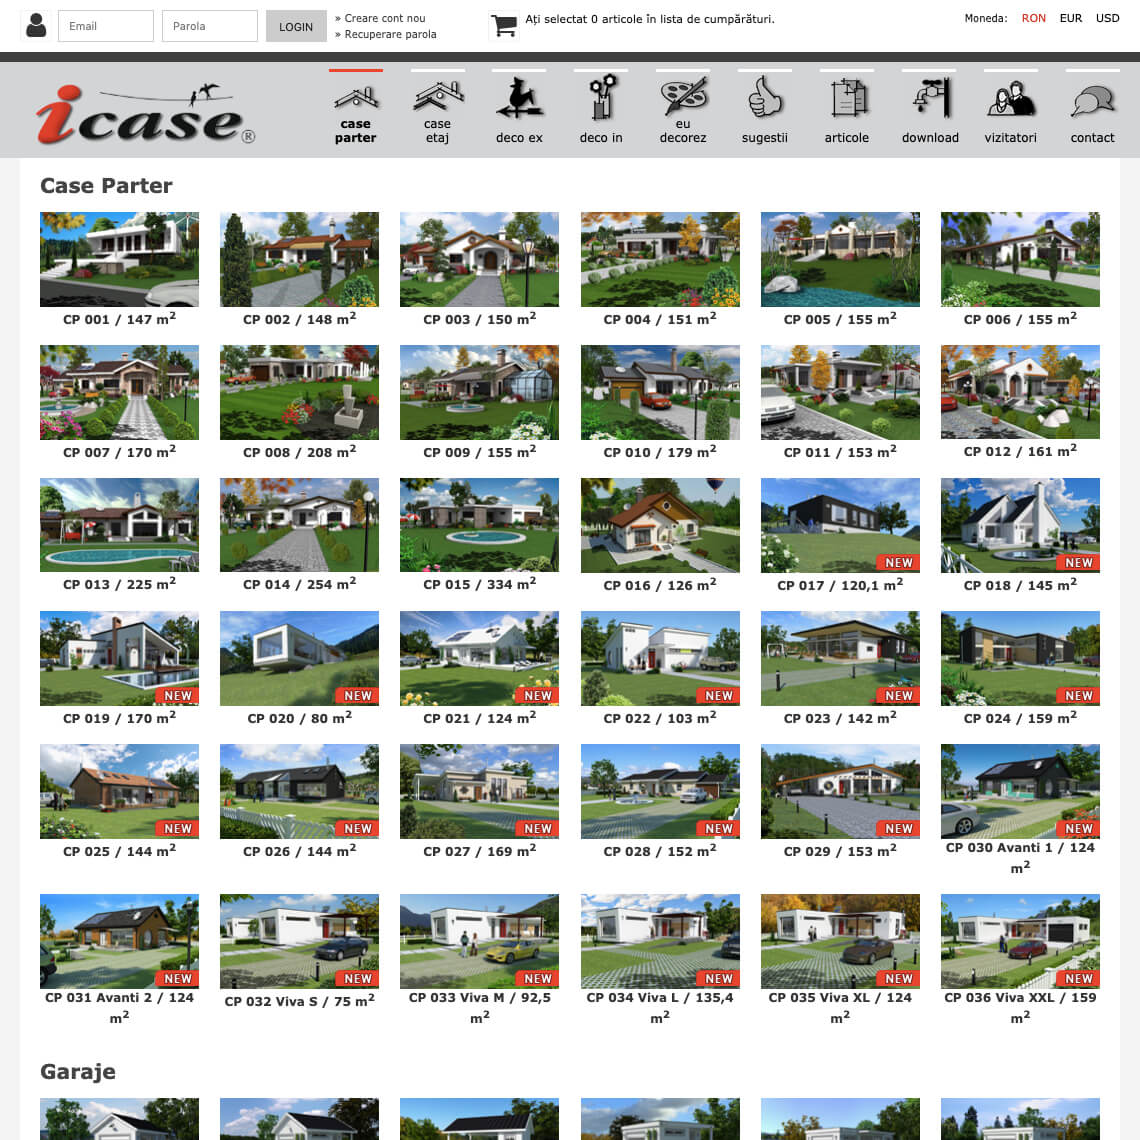 Houses/residential projects listing